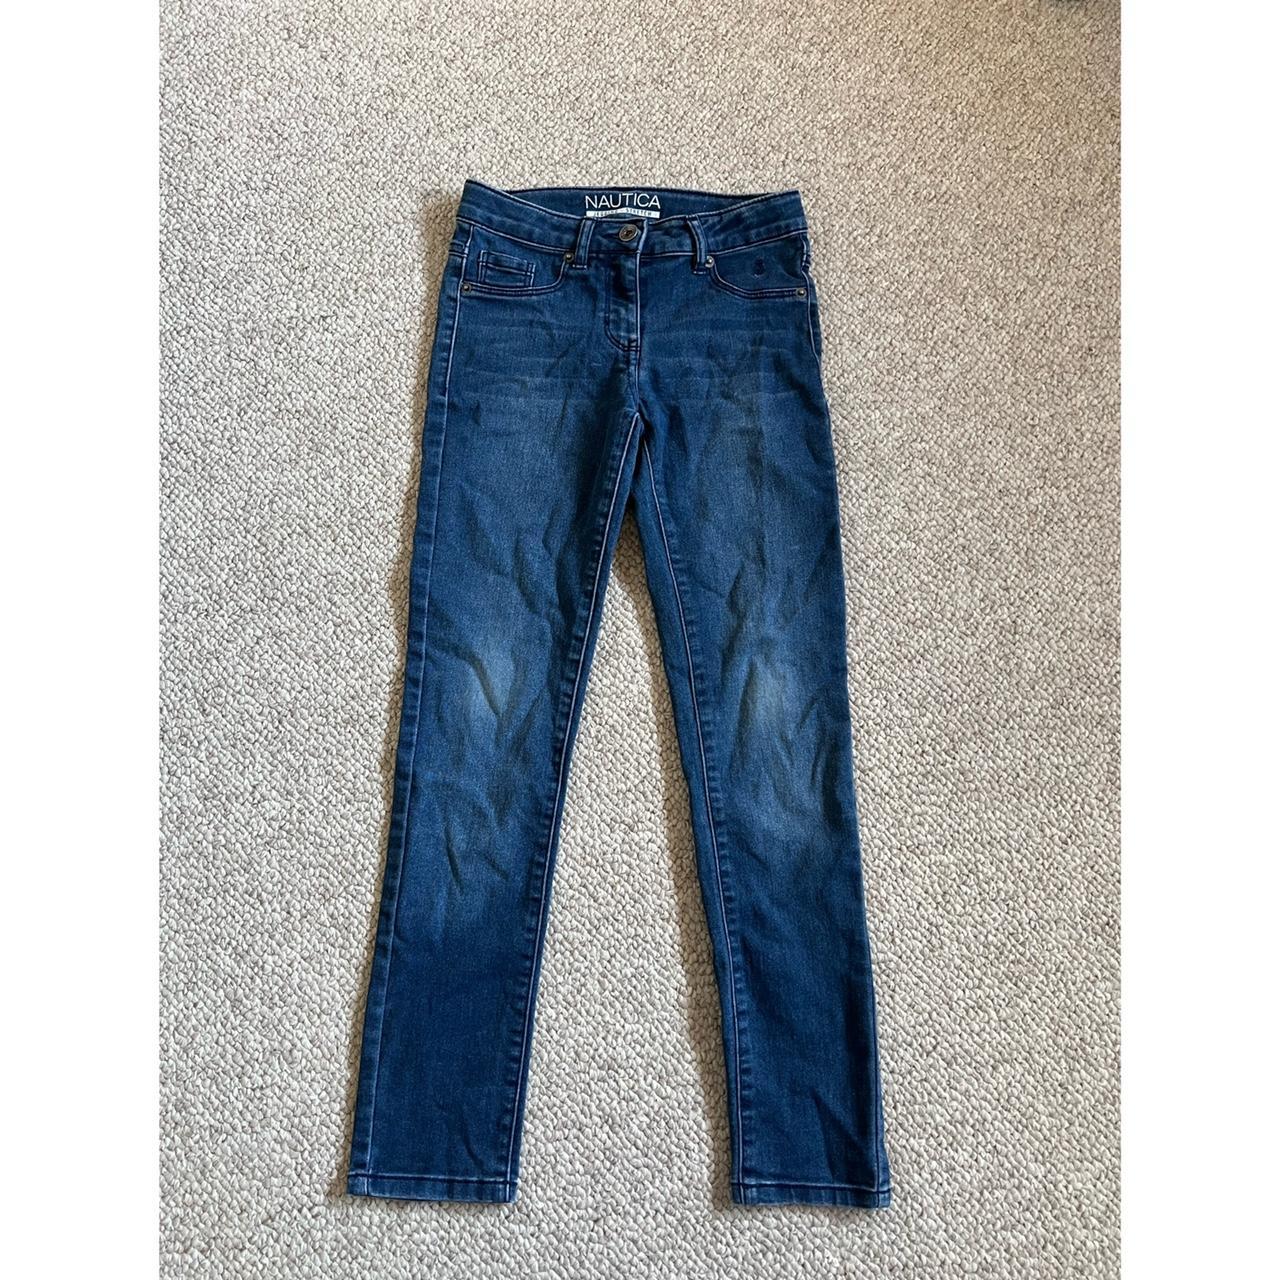 Nautica stretchy jeggings in amazing preloved... - Depop